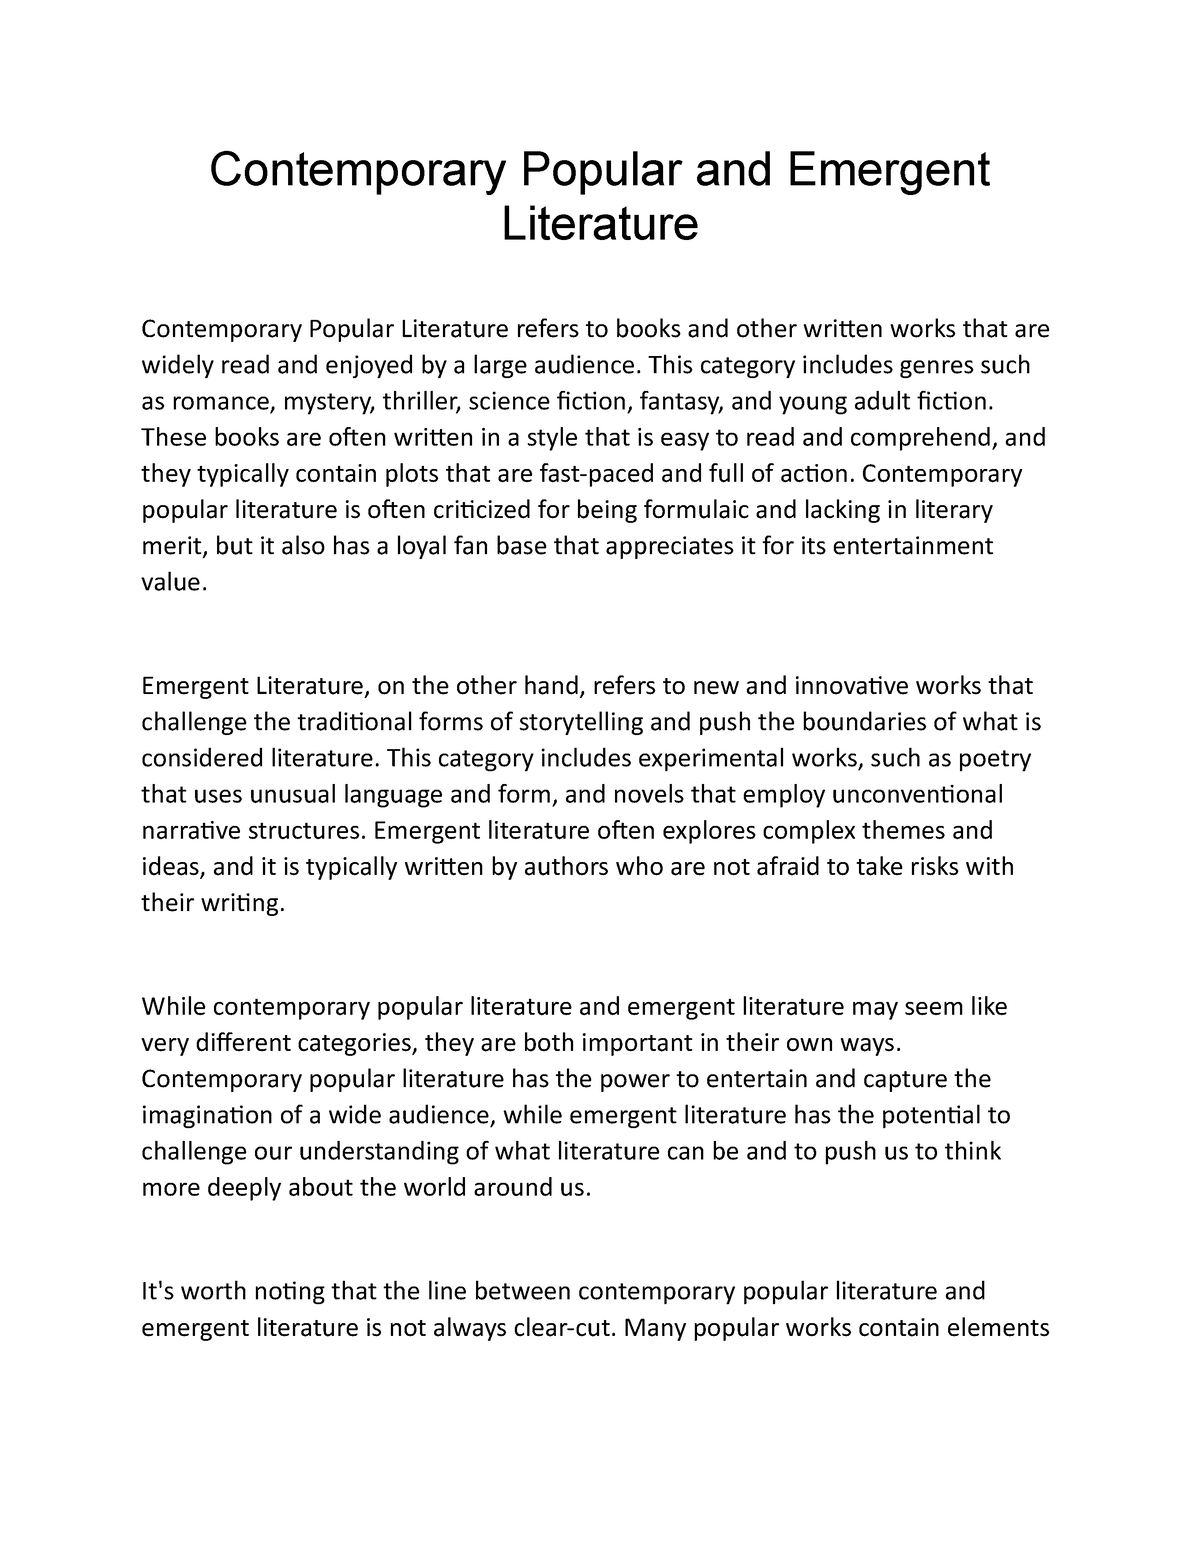 research paper about contemporary literature